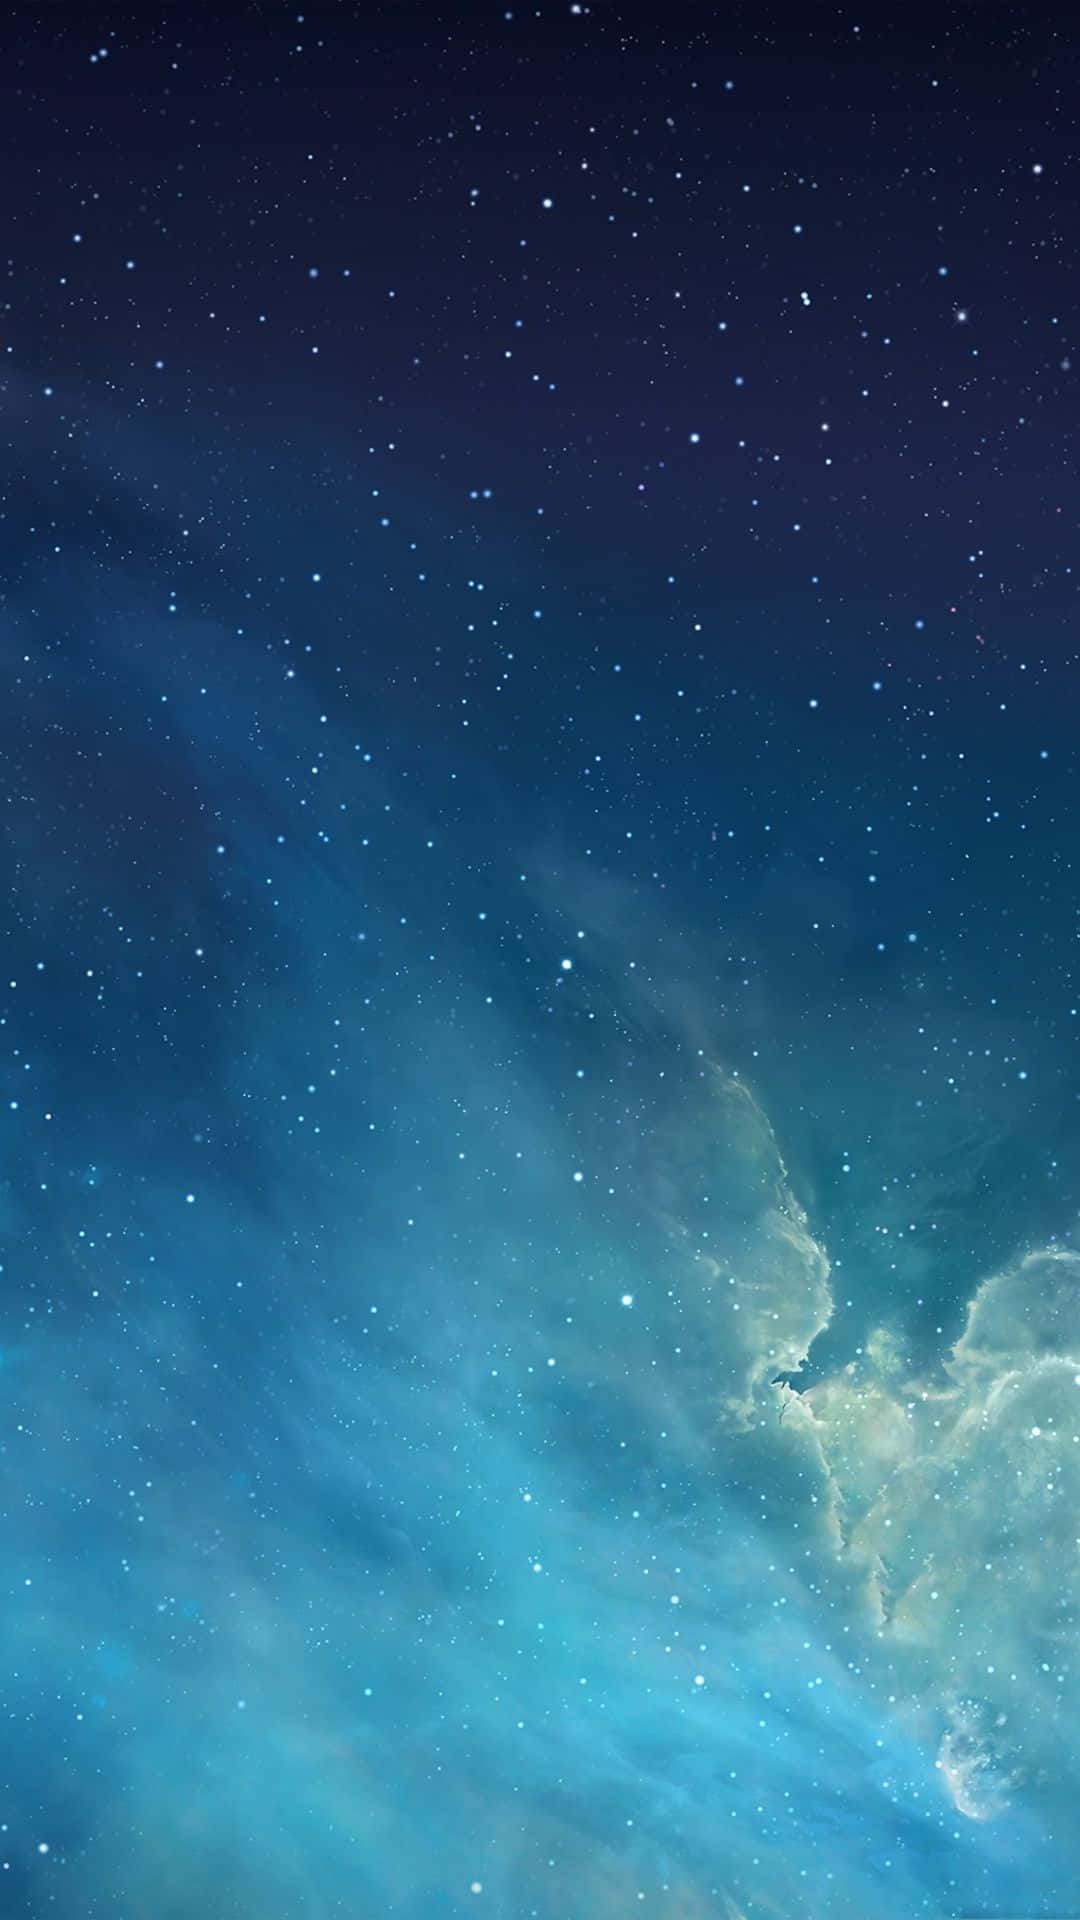 Unlock your Cool Iphone today with this unique lock screen Wallpaper